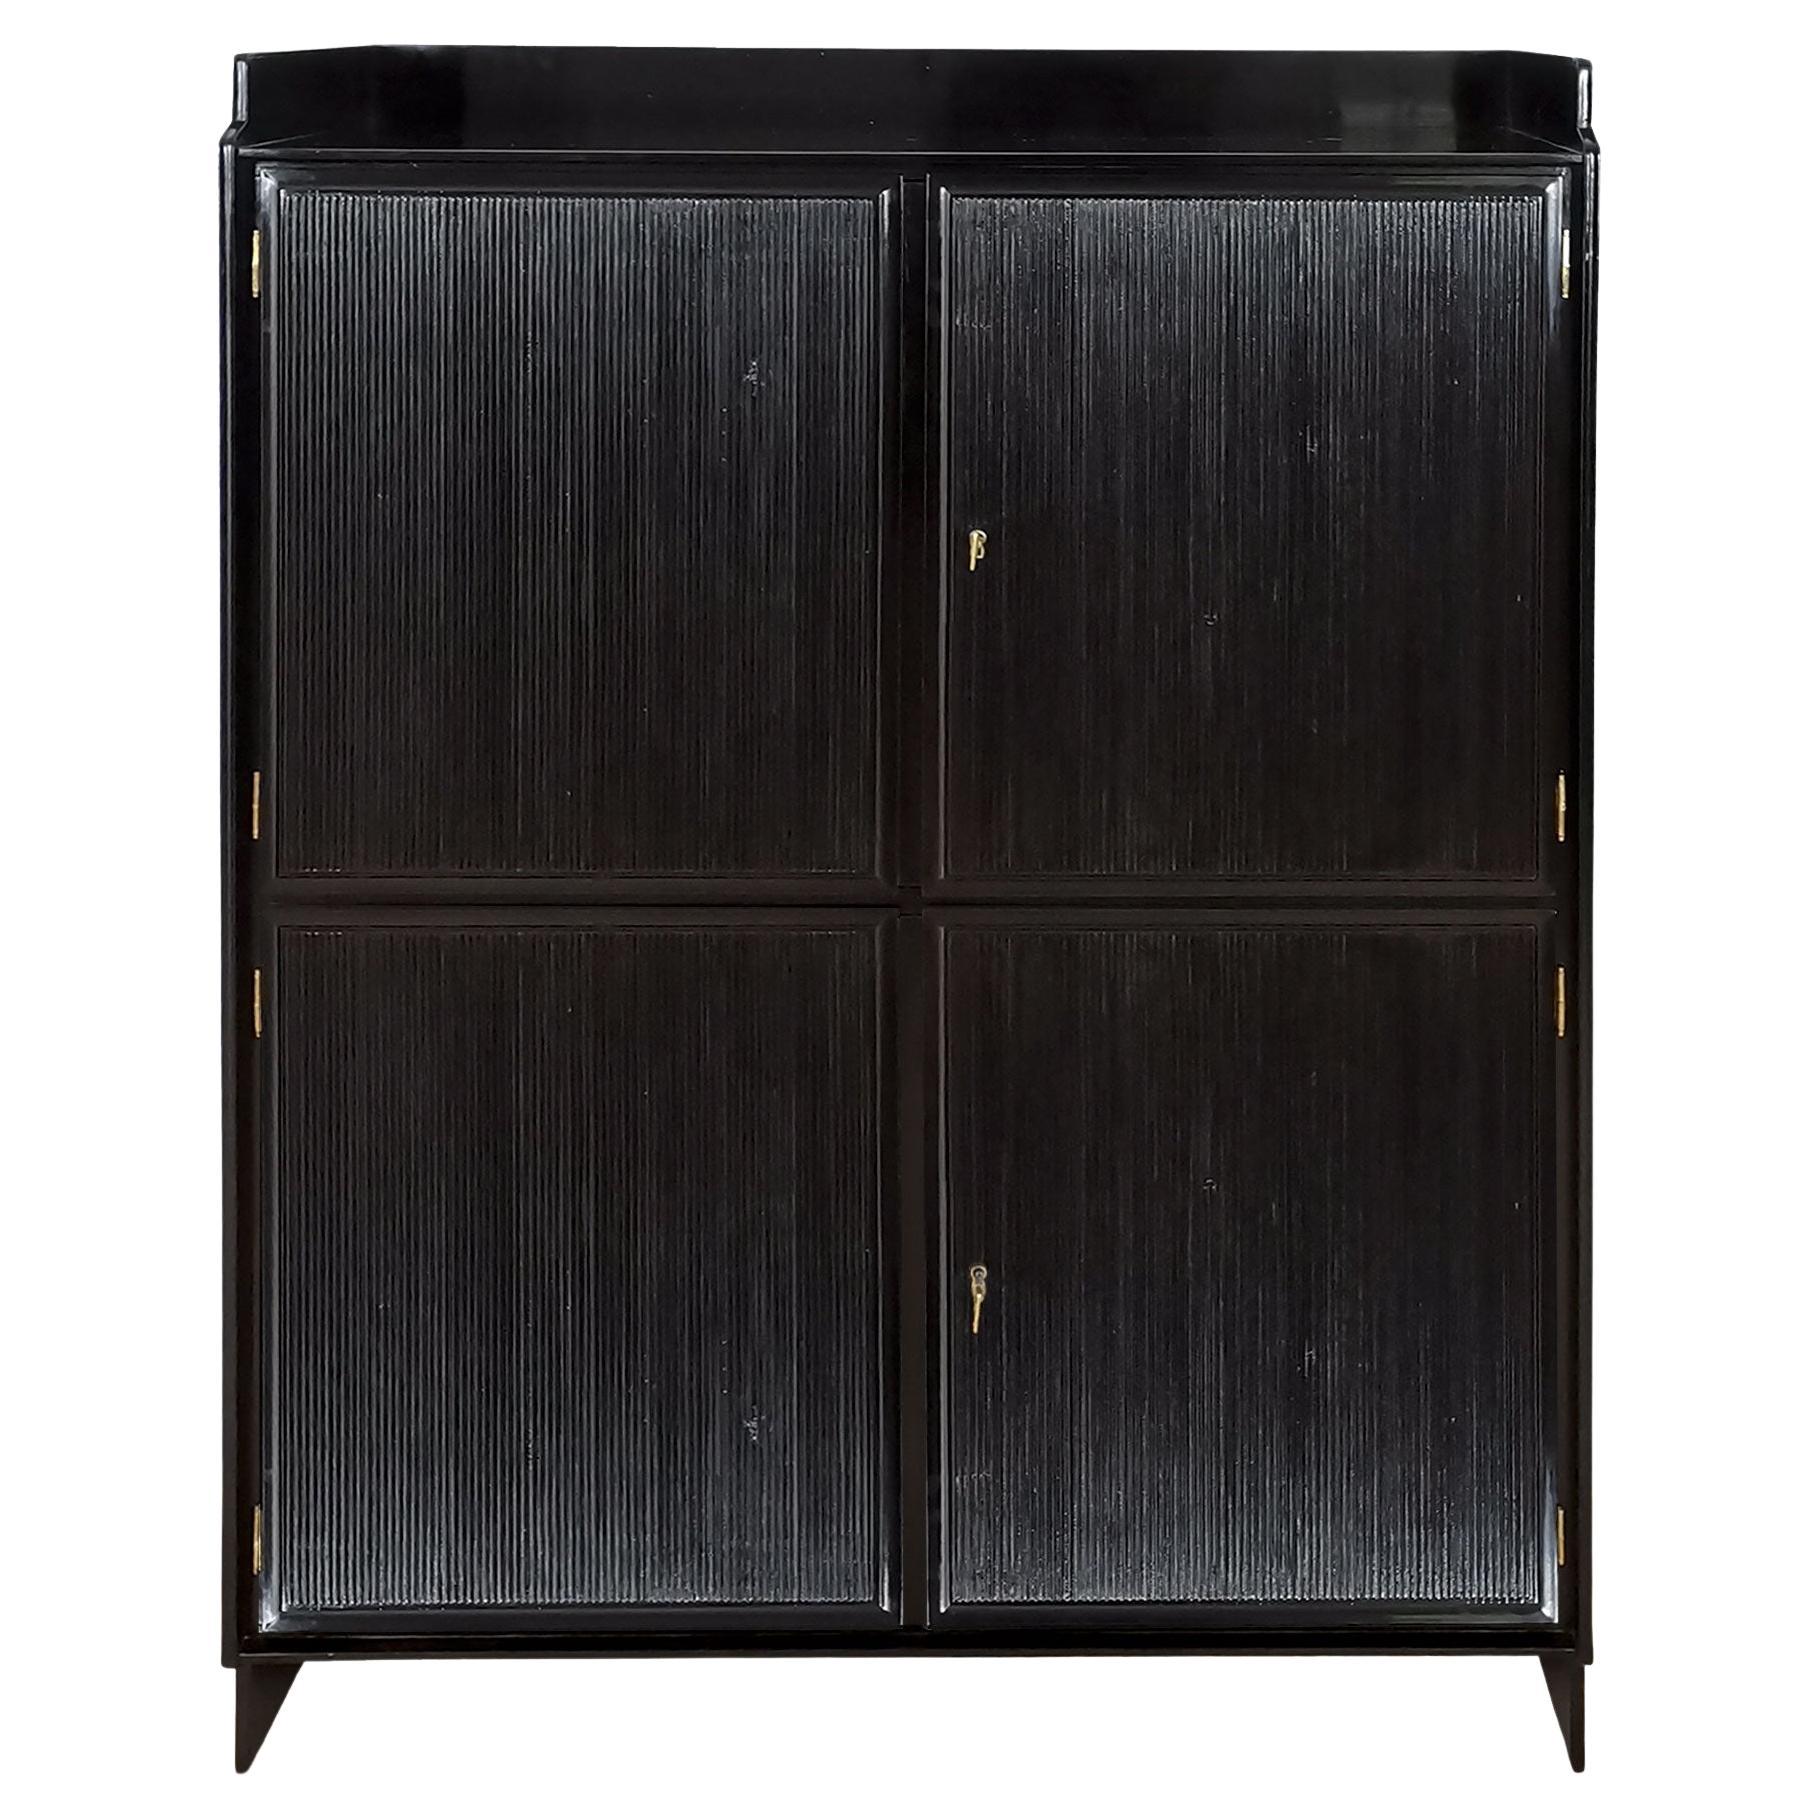 1940's  Cabinet with Four Doors, "Grissini" Decoration, Walnut, Italy